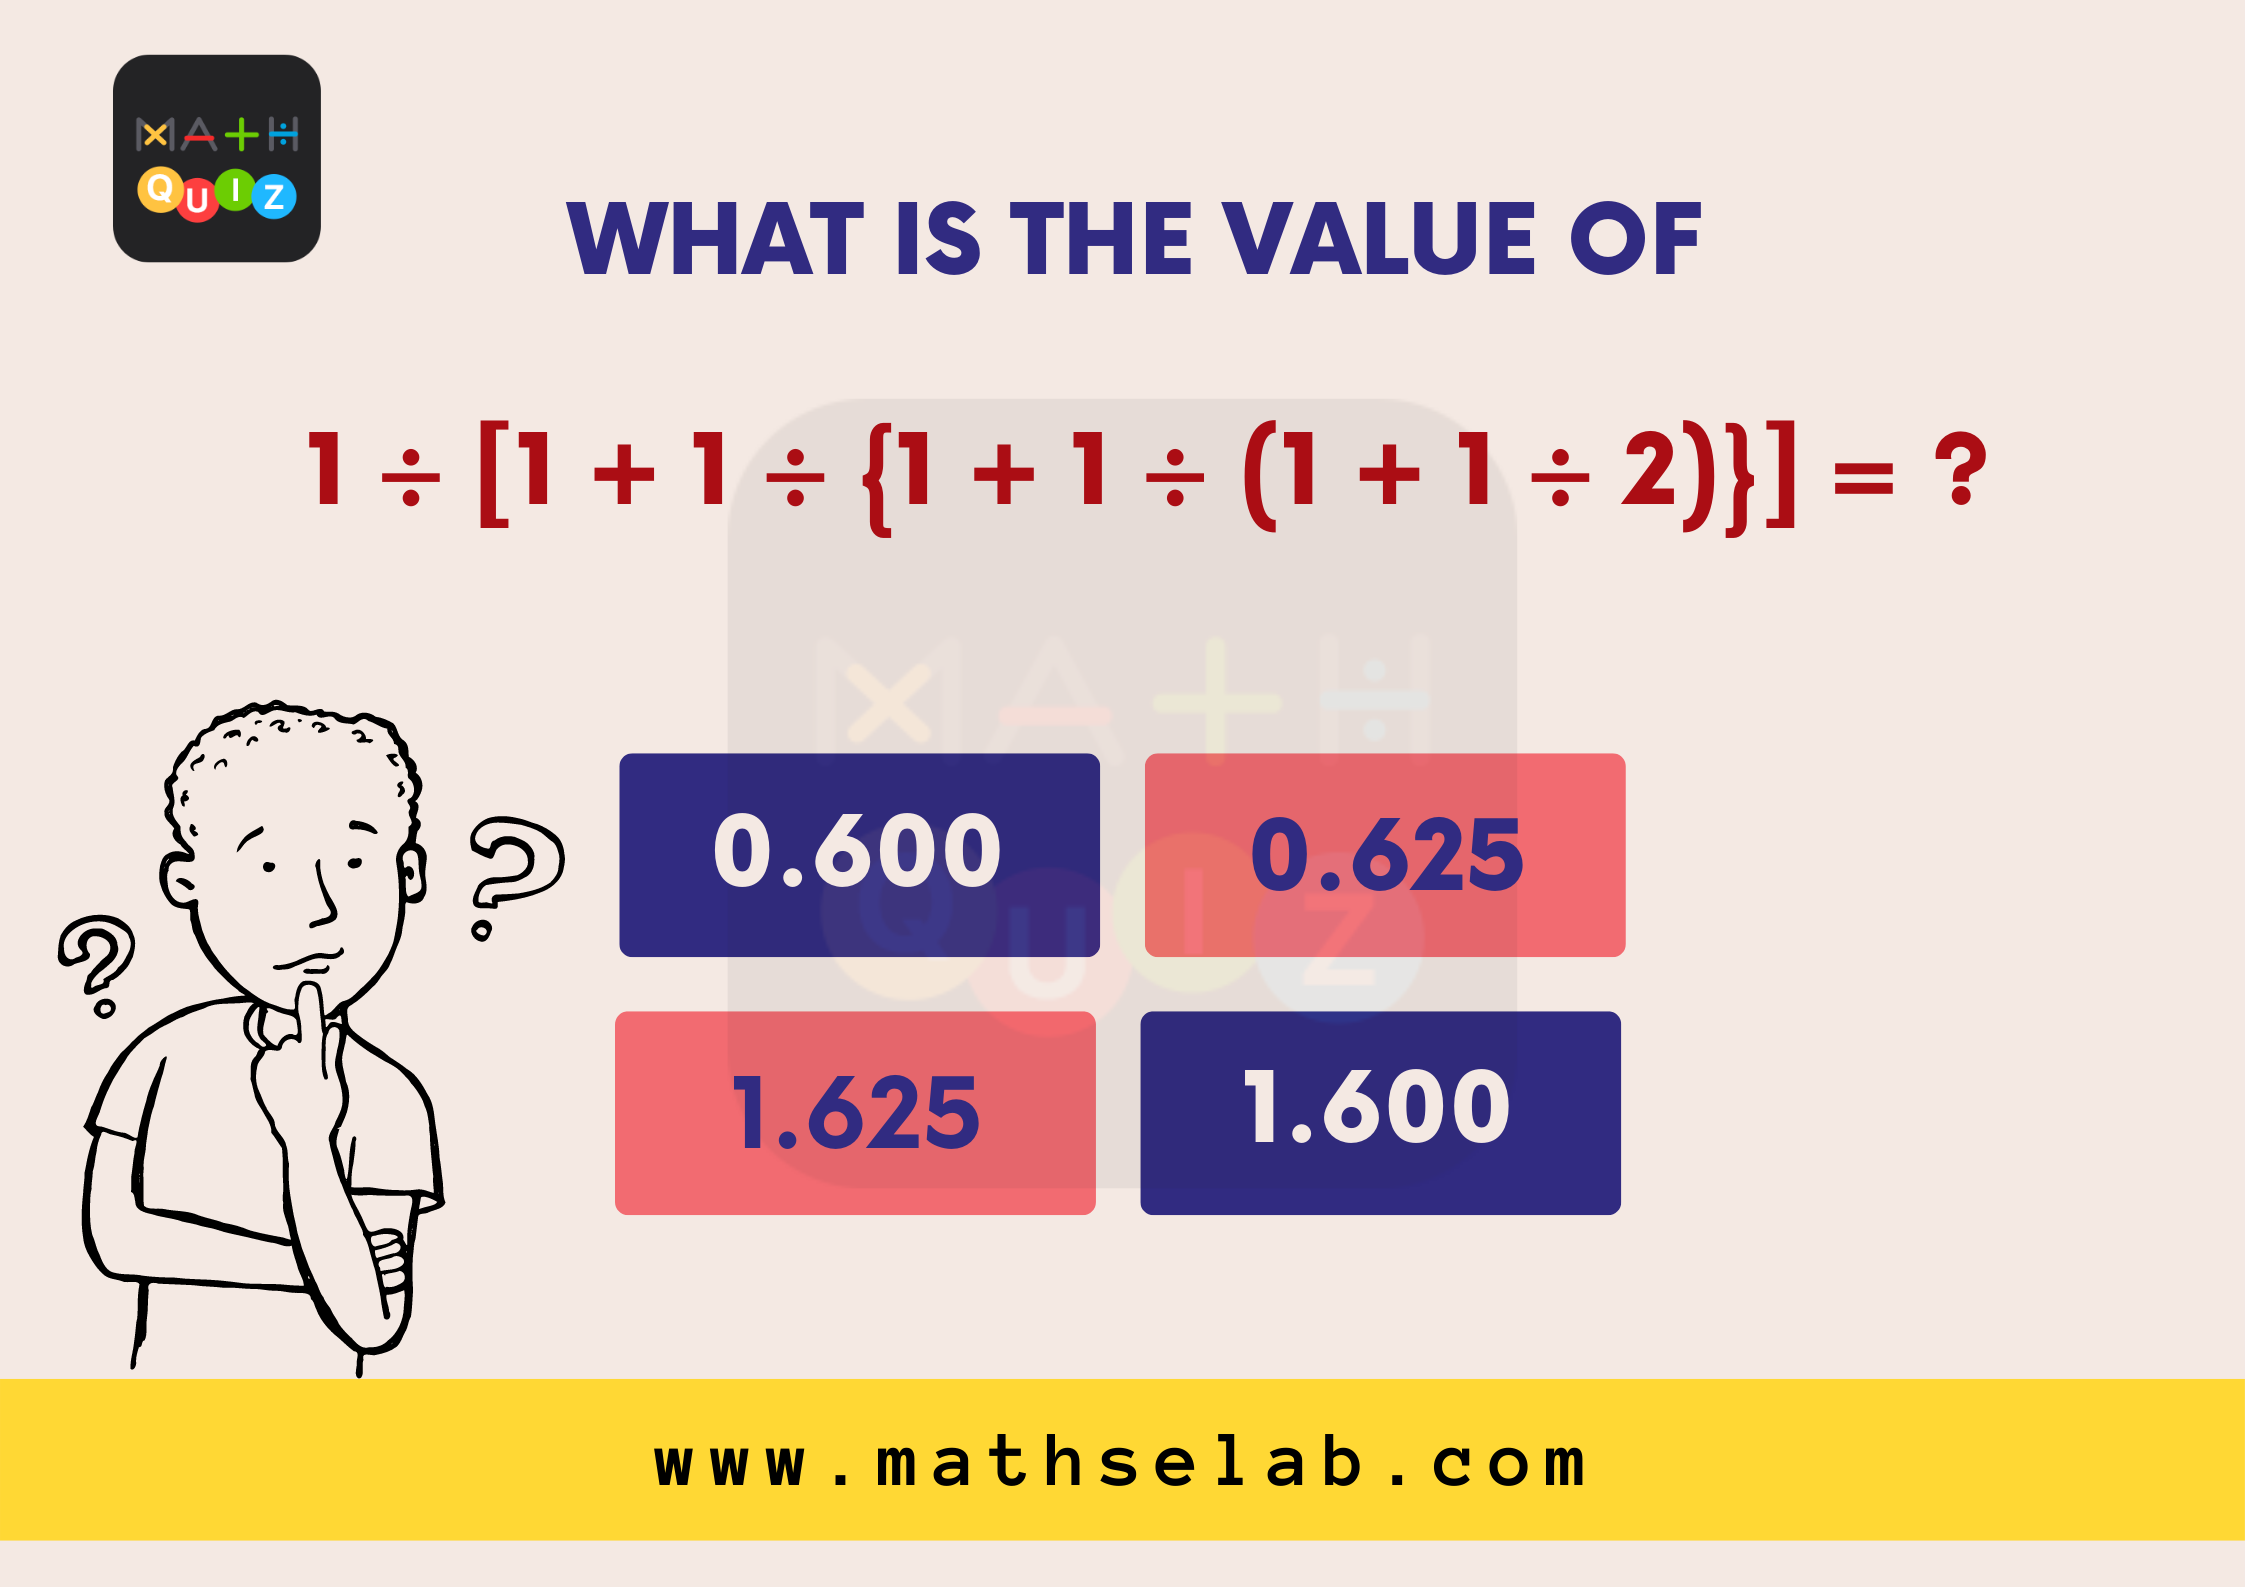 What is the value of 1 ÷ [1 + 1 ÷ {1 + 1 ÷ (1 + 1 ÷ 2)}] = ?